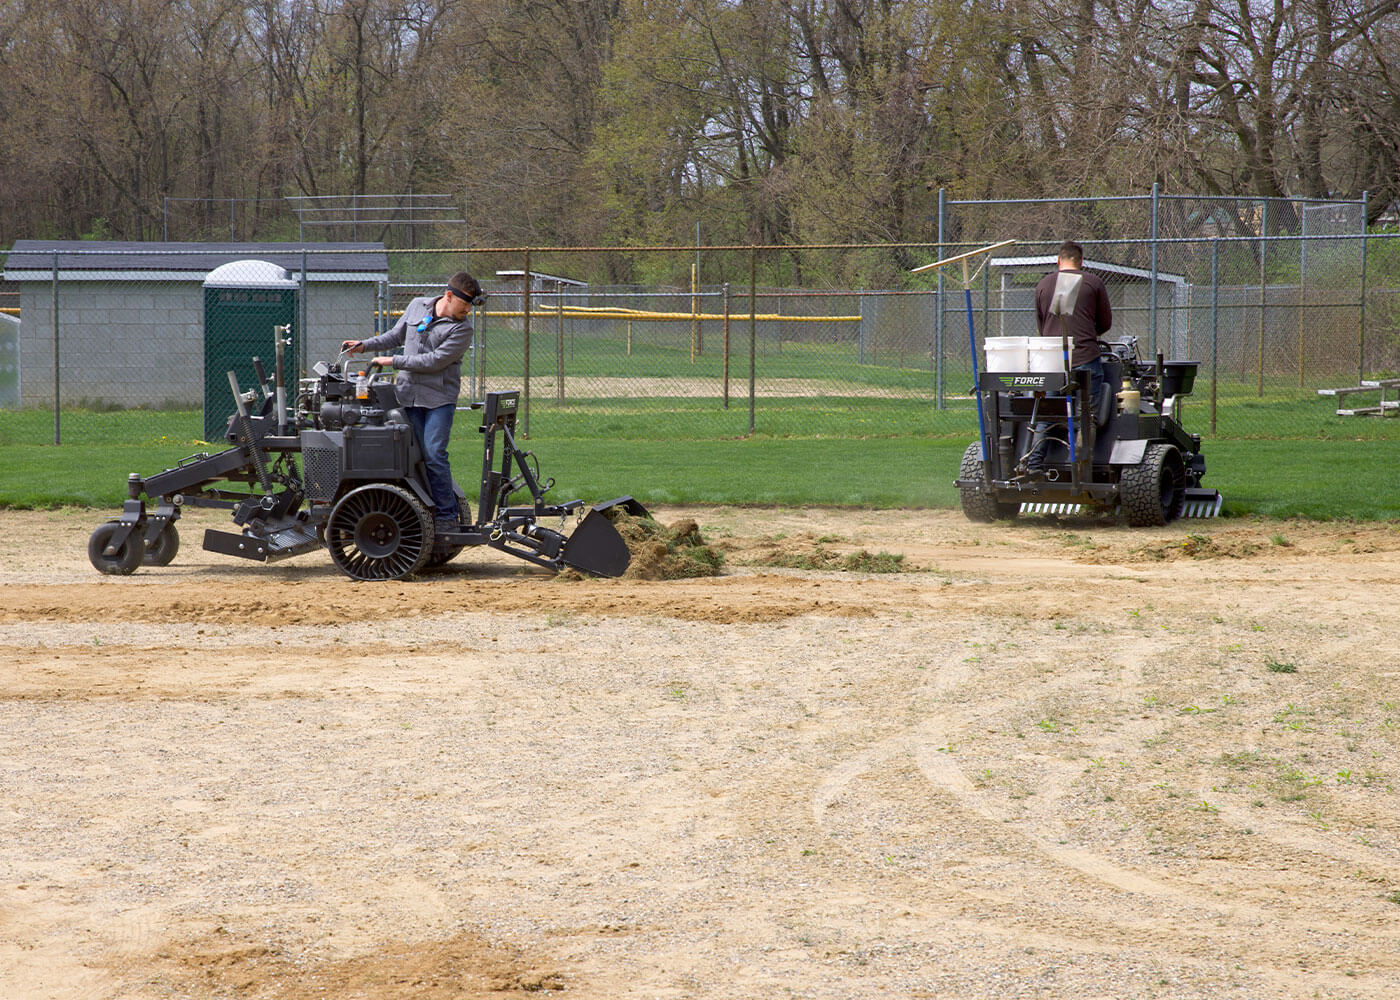 Ball field maintenance crew using Force Z-23 machines for infield grooming work 